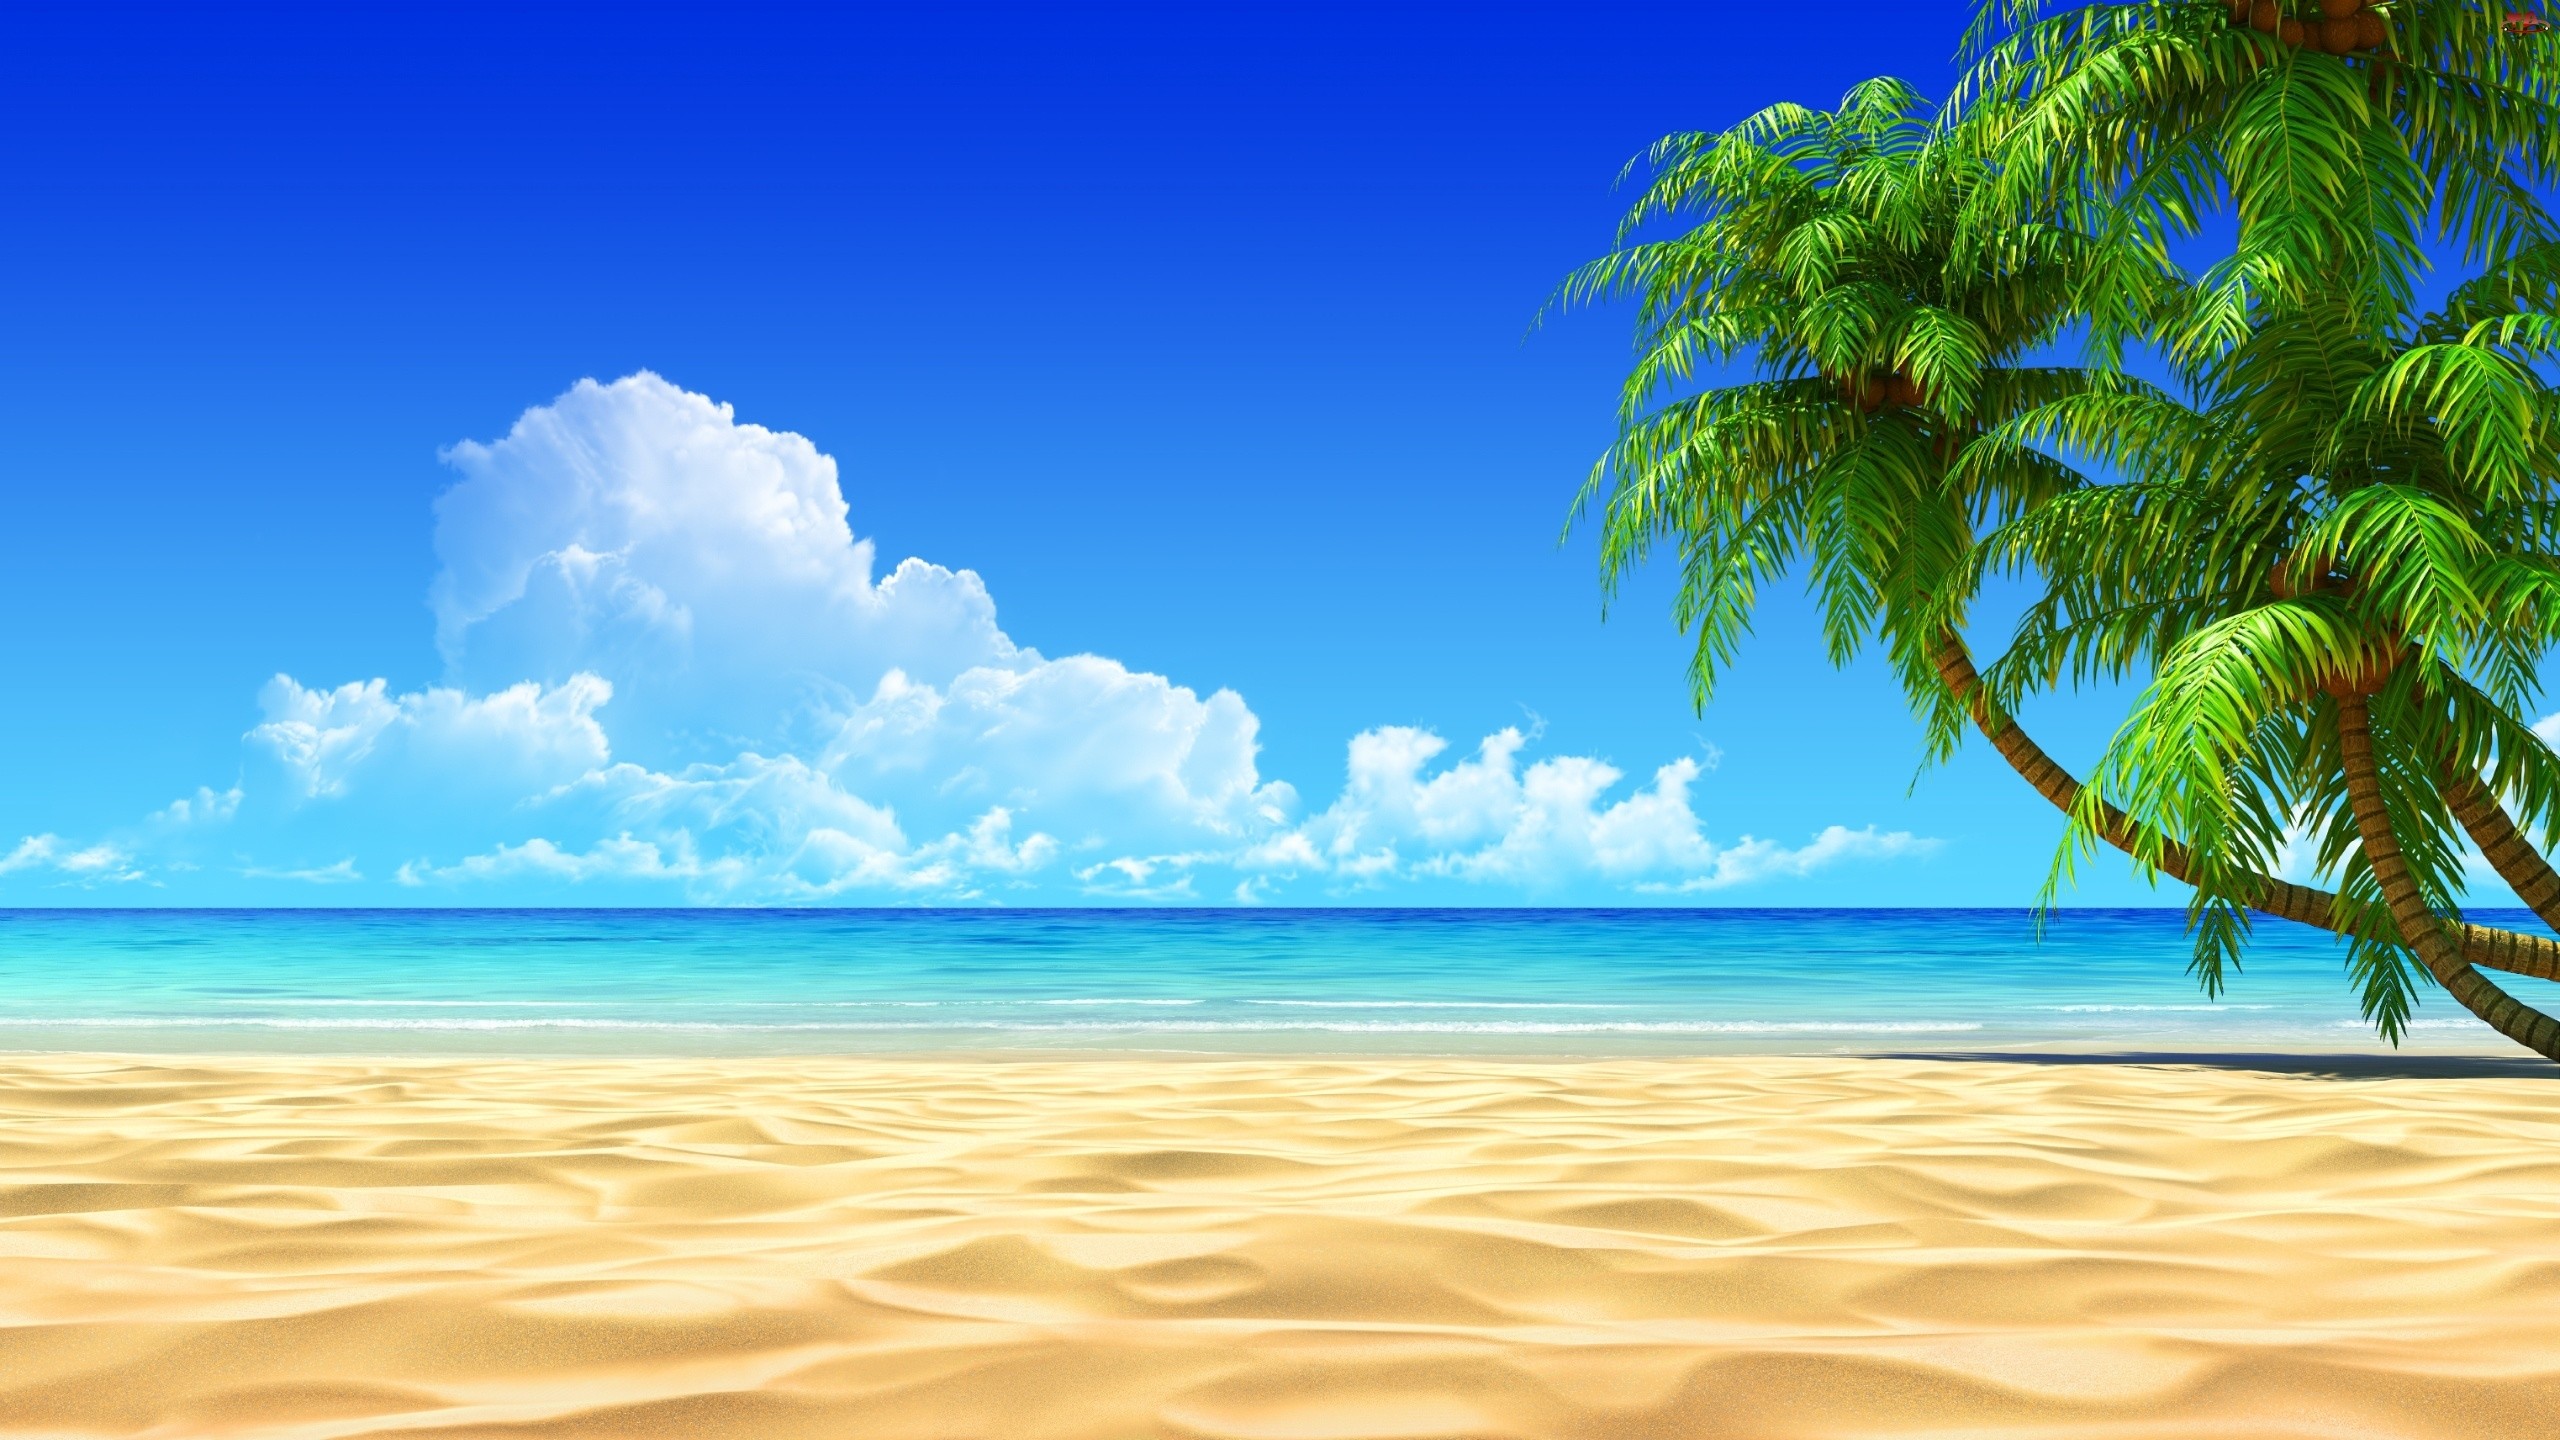 Beach HD Wallpapers 1080p (68+ images)